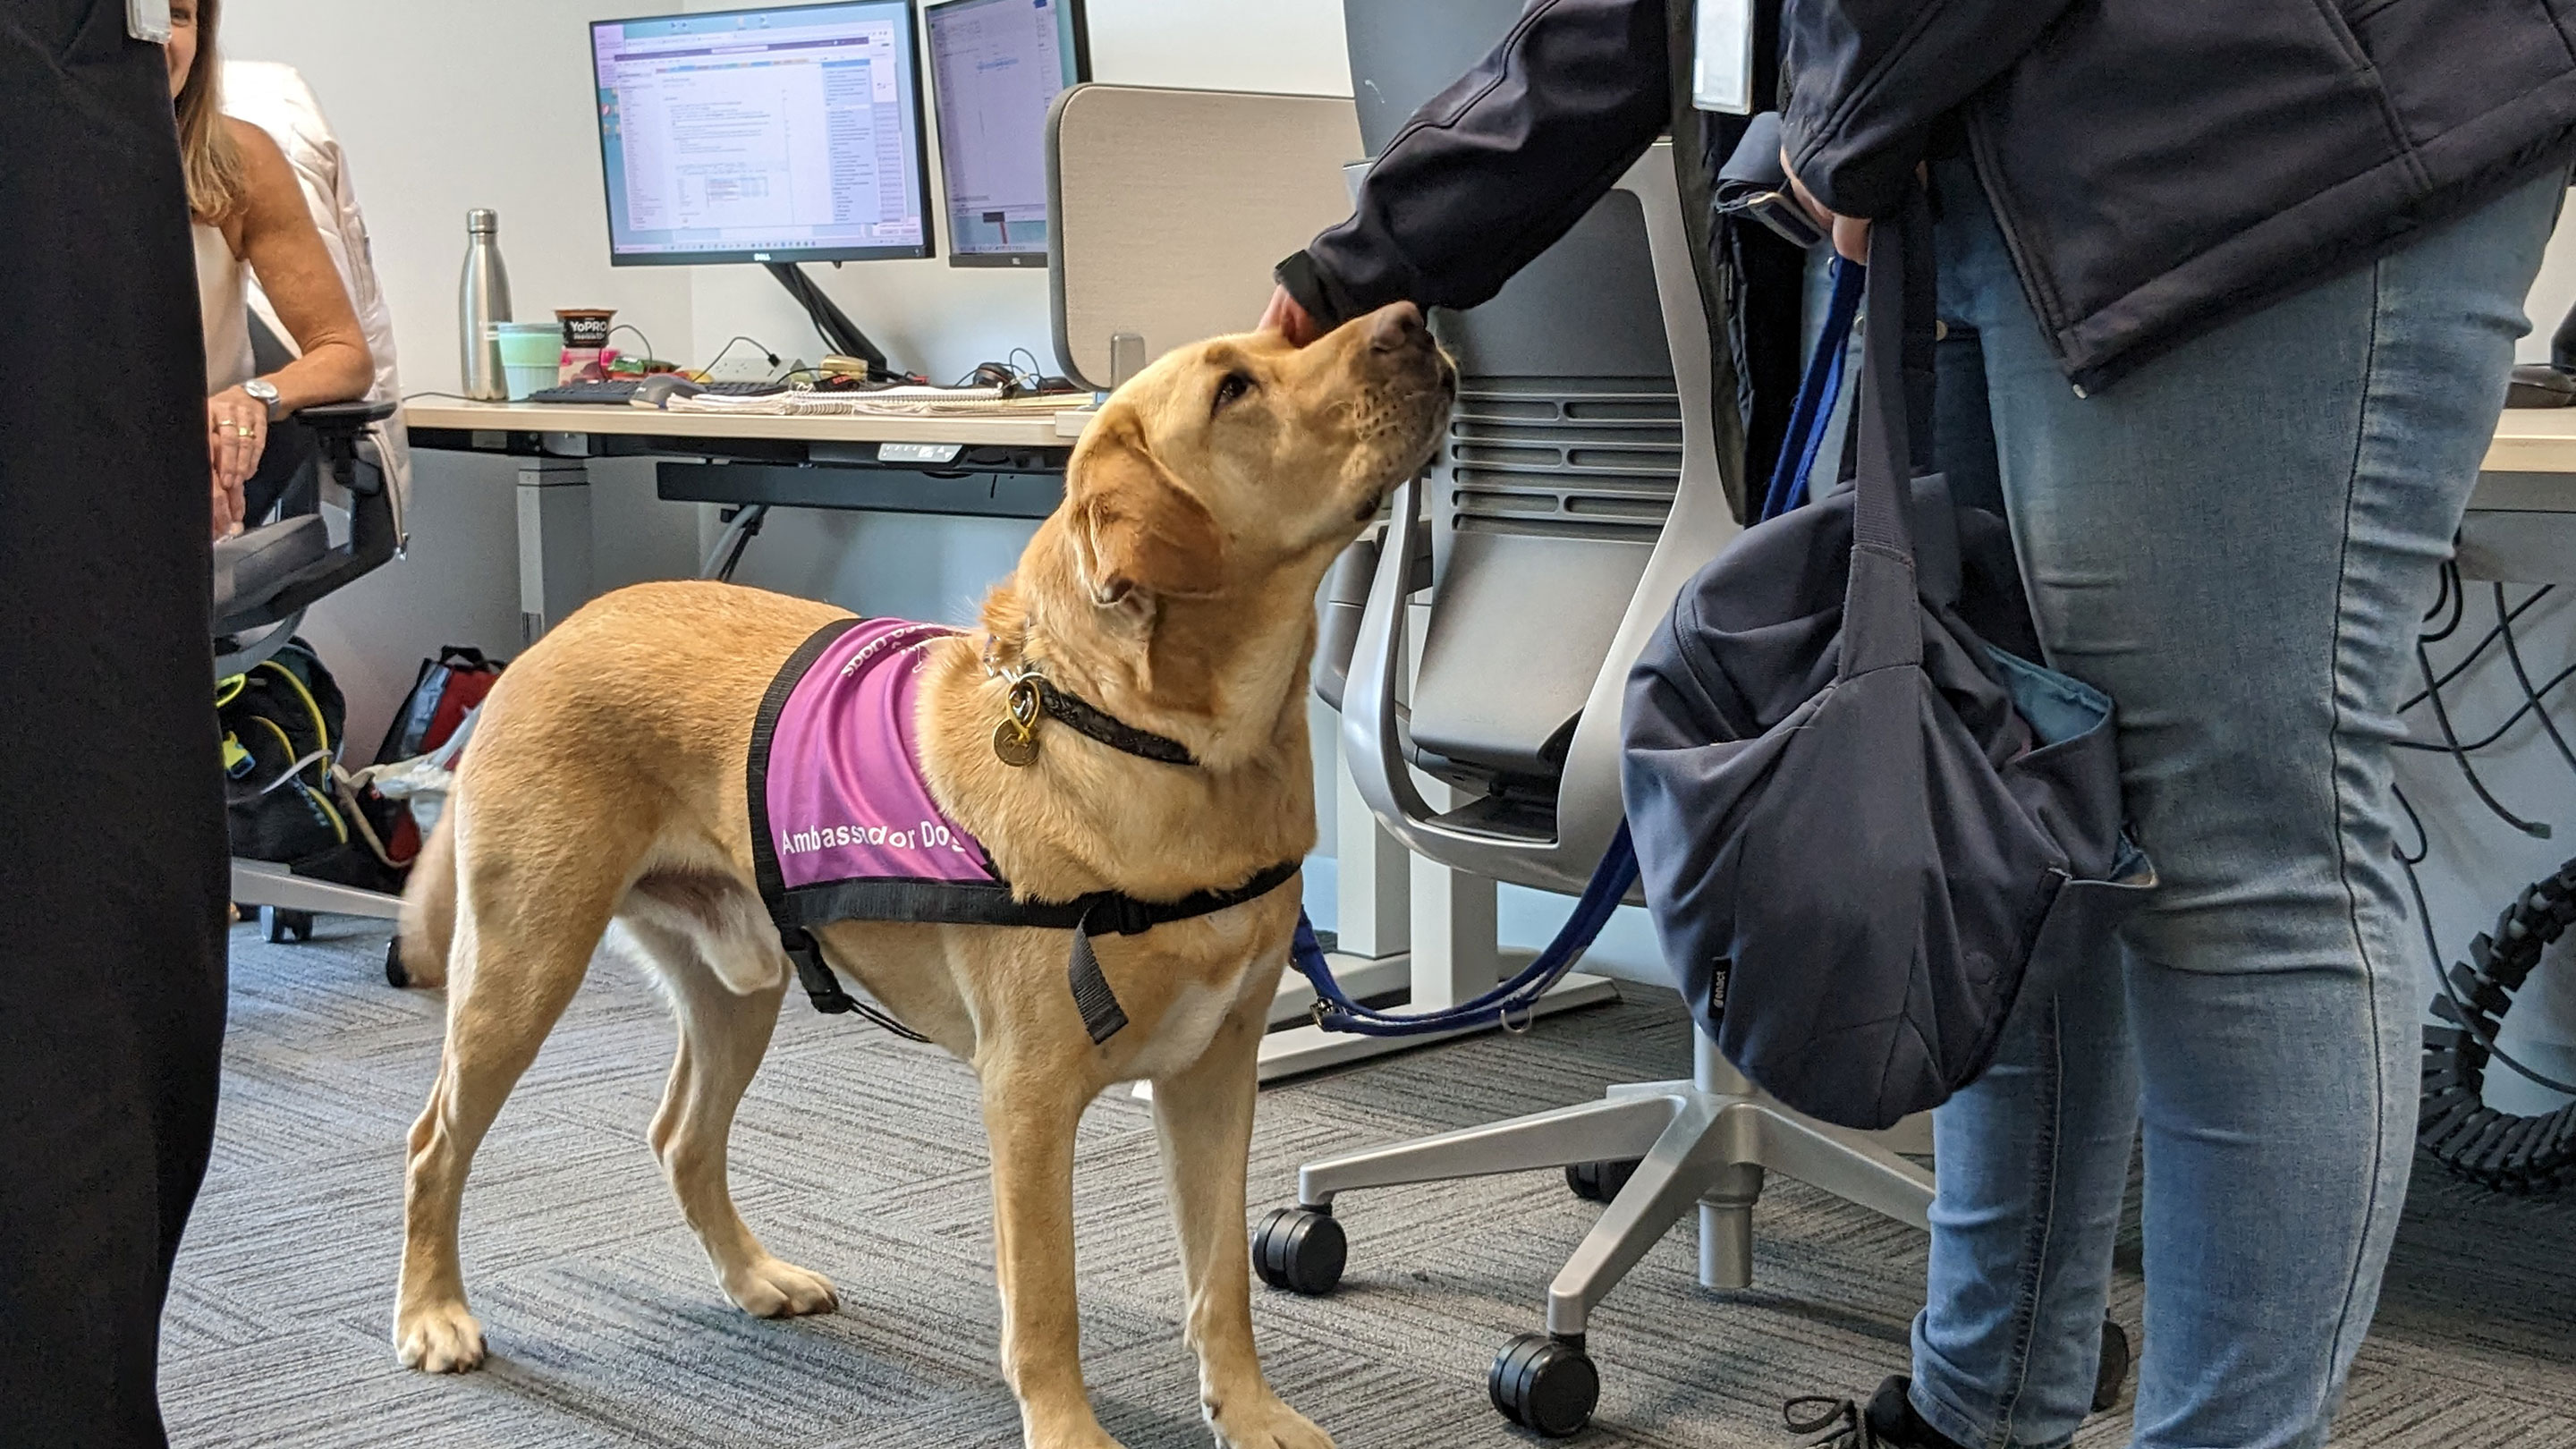 Image Assistance Dogs Australia brings Snowy in to ExxonMobil Australia's head office for a visit.